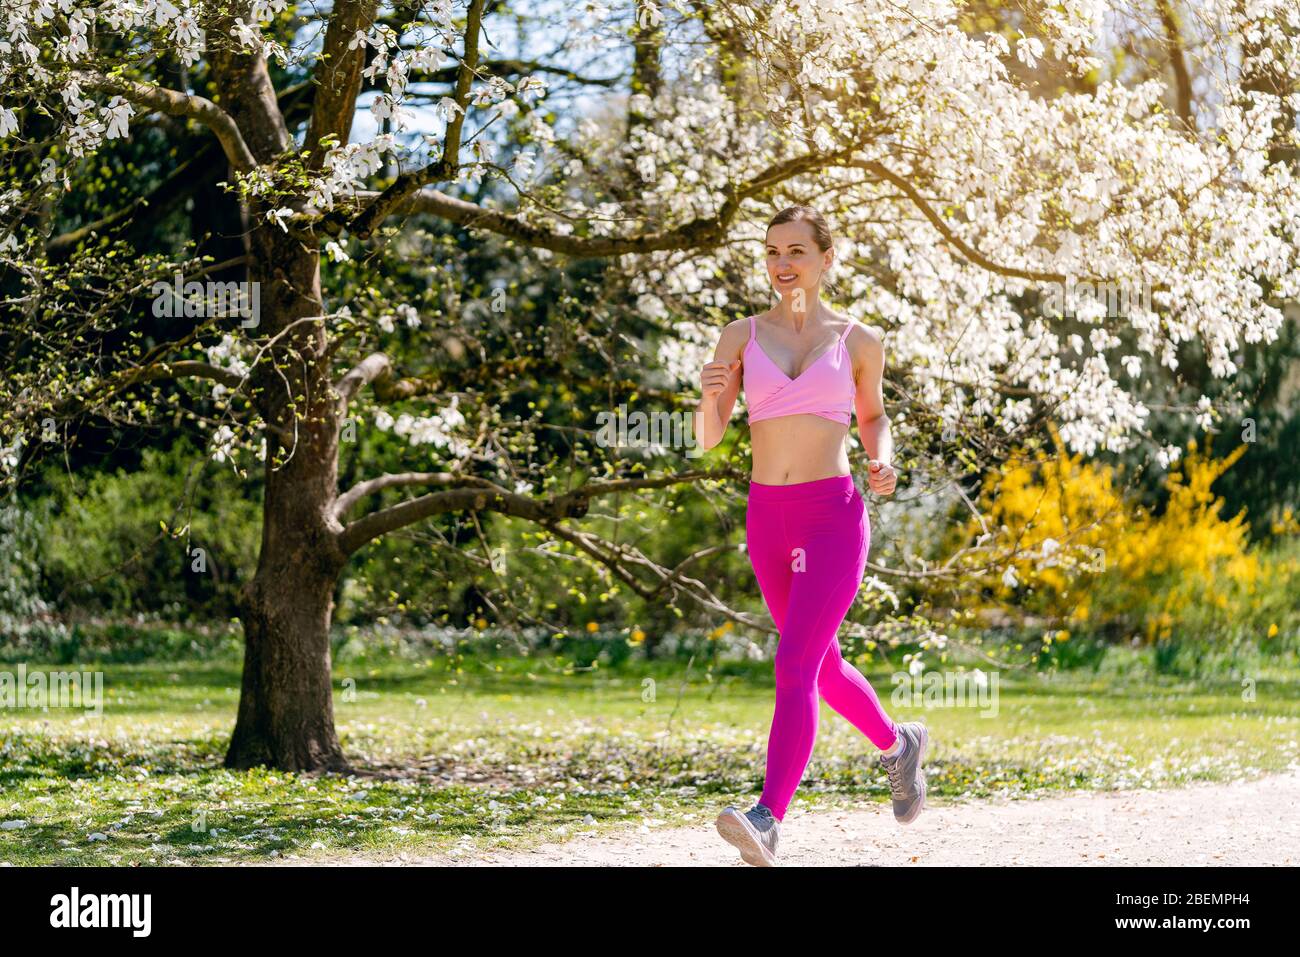 Woman running in spring park Stock Photo